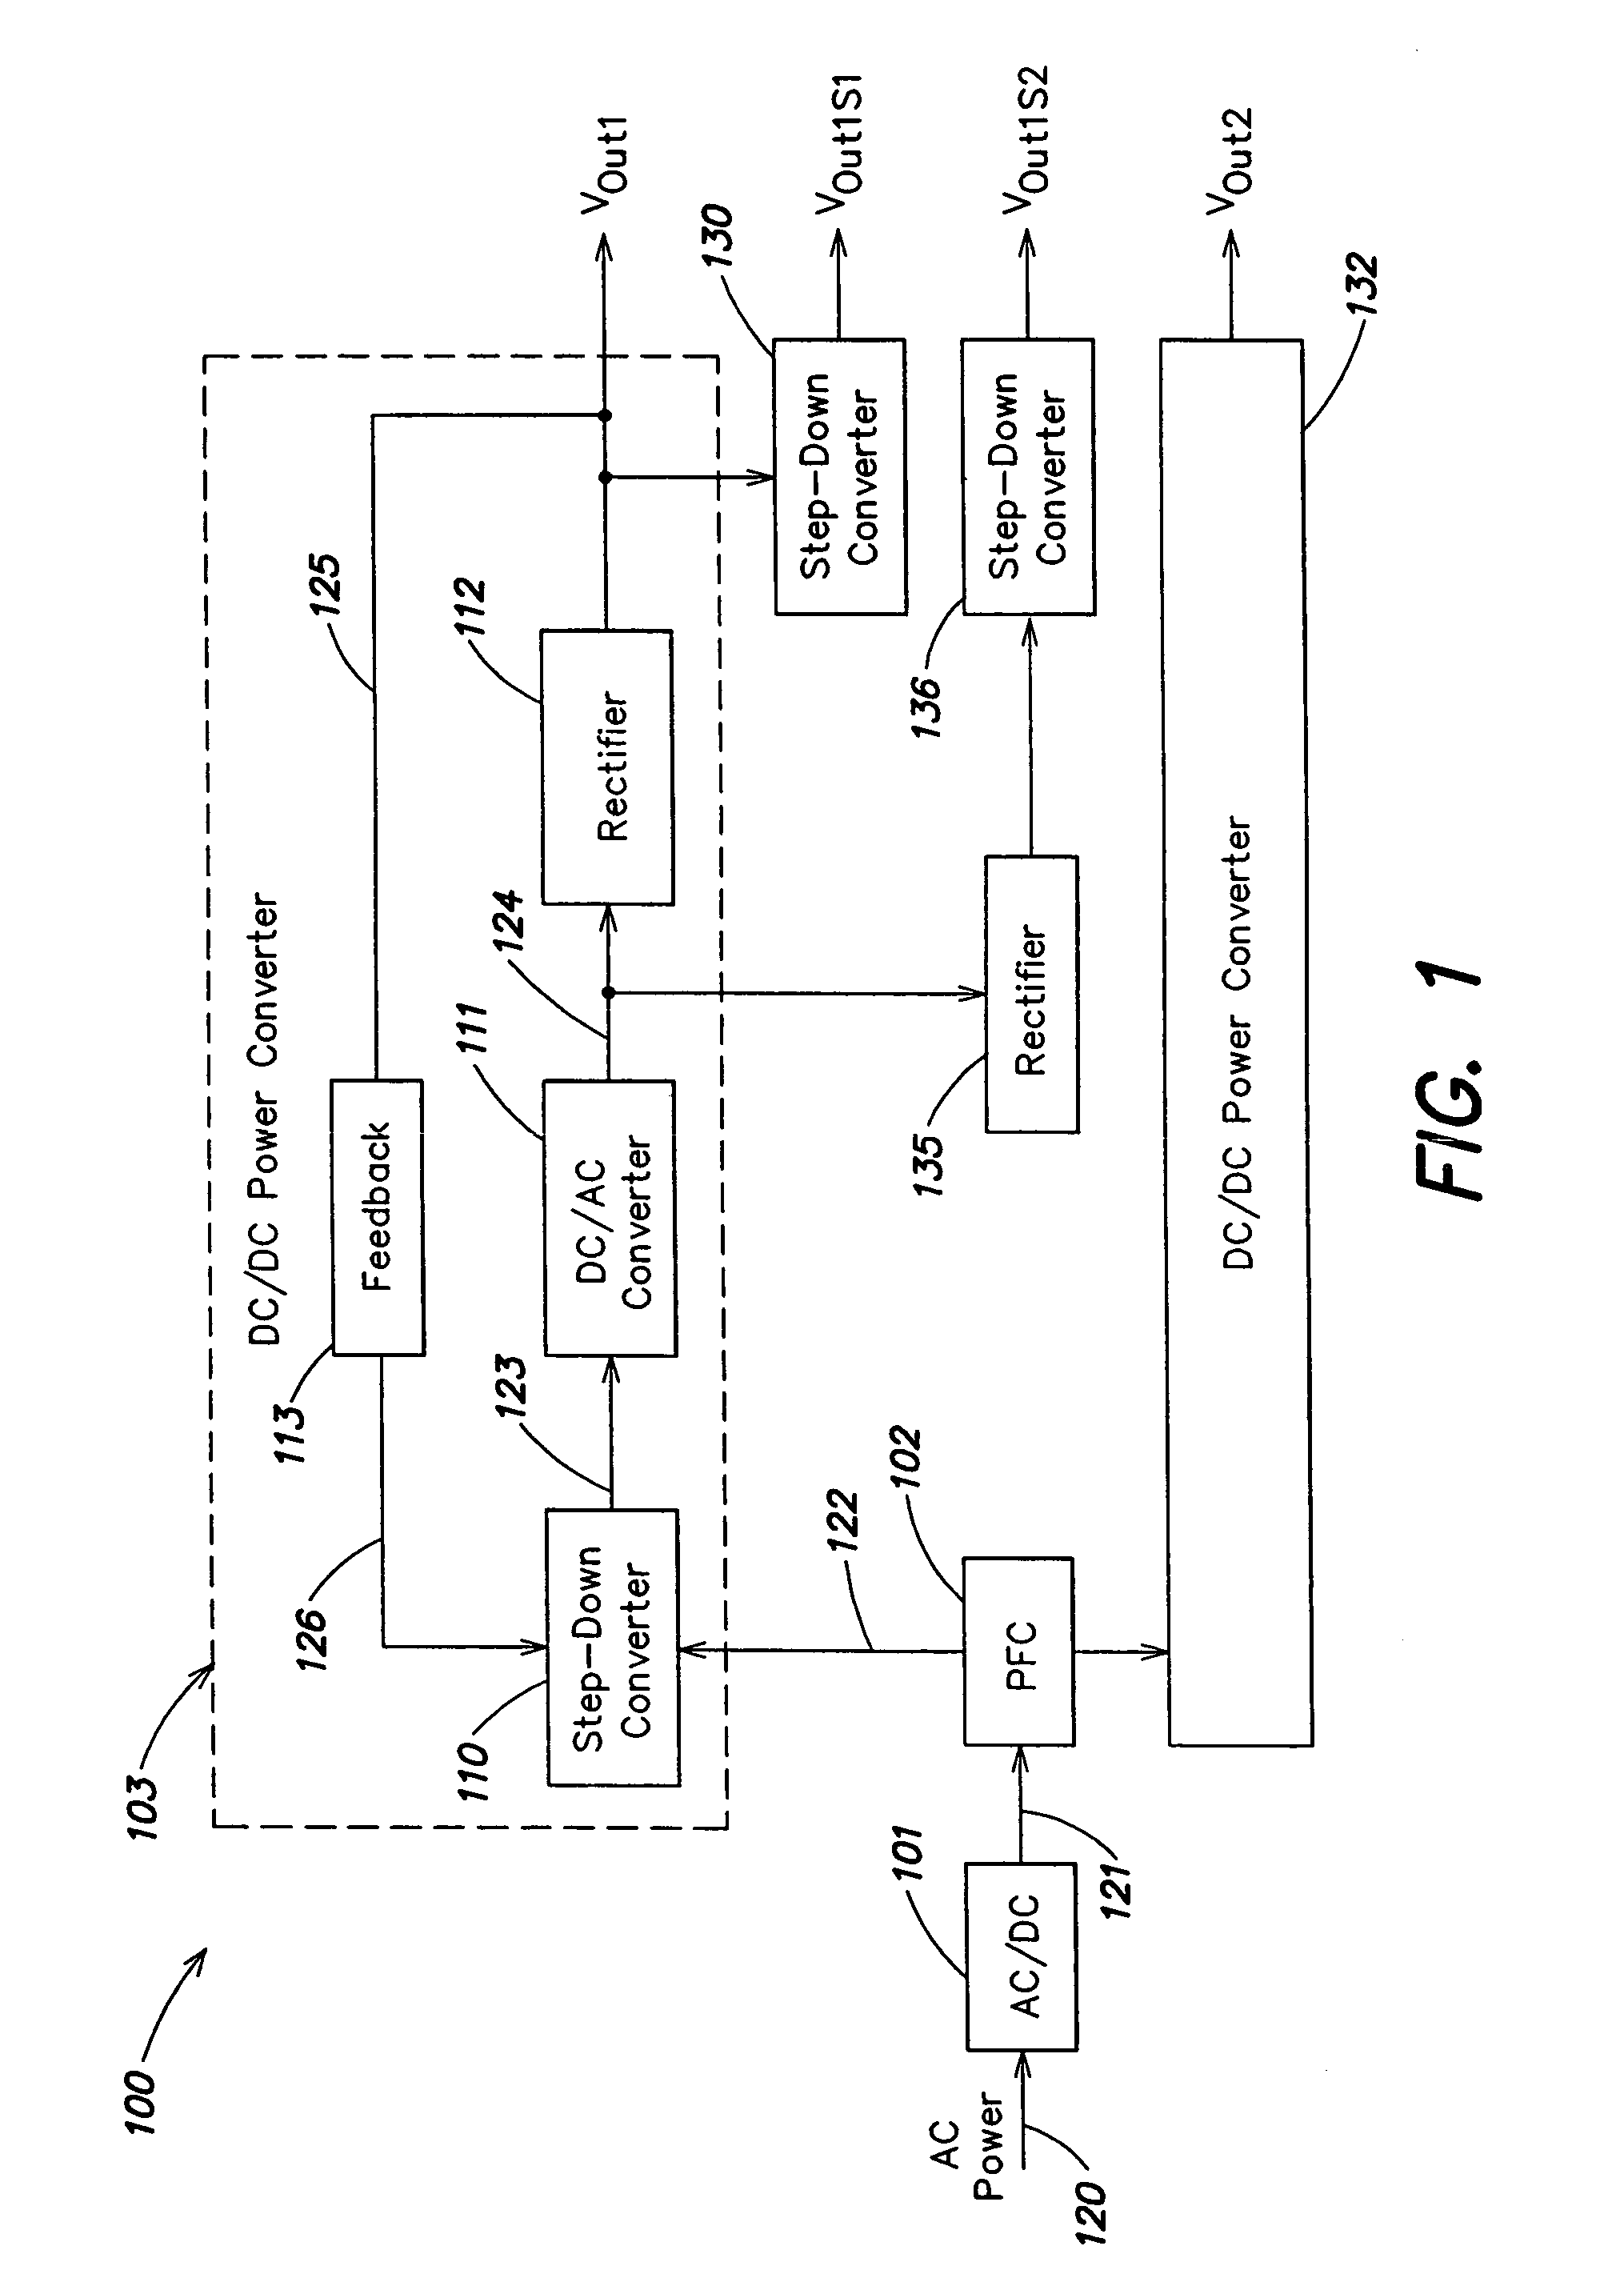 Switching type power converter circuit and method for use therein